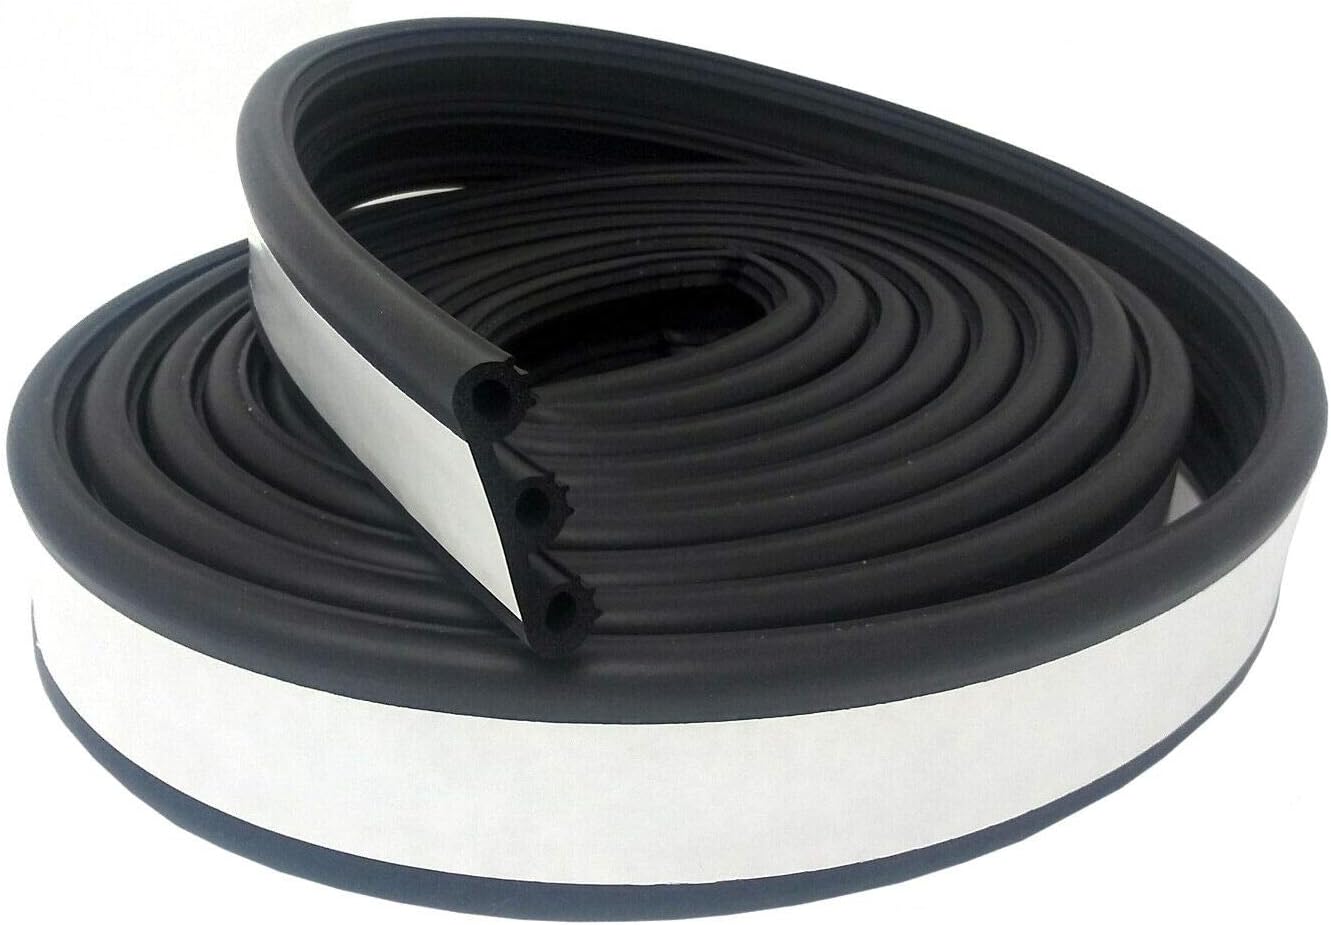 Extruded Solutions ESI Super Cap Seal XL 20 FT (2 1/8" Width x 1/2" Height x 20' Length) EPDM Rubber for Caps Over 200 lbs